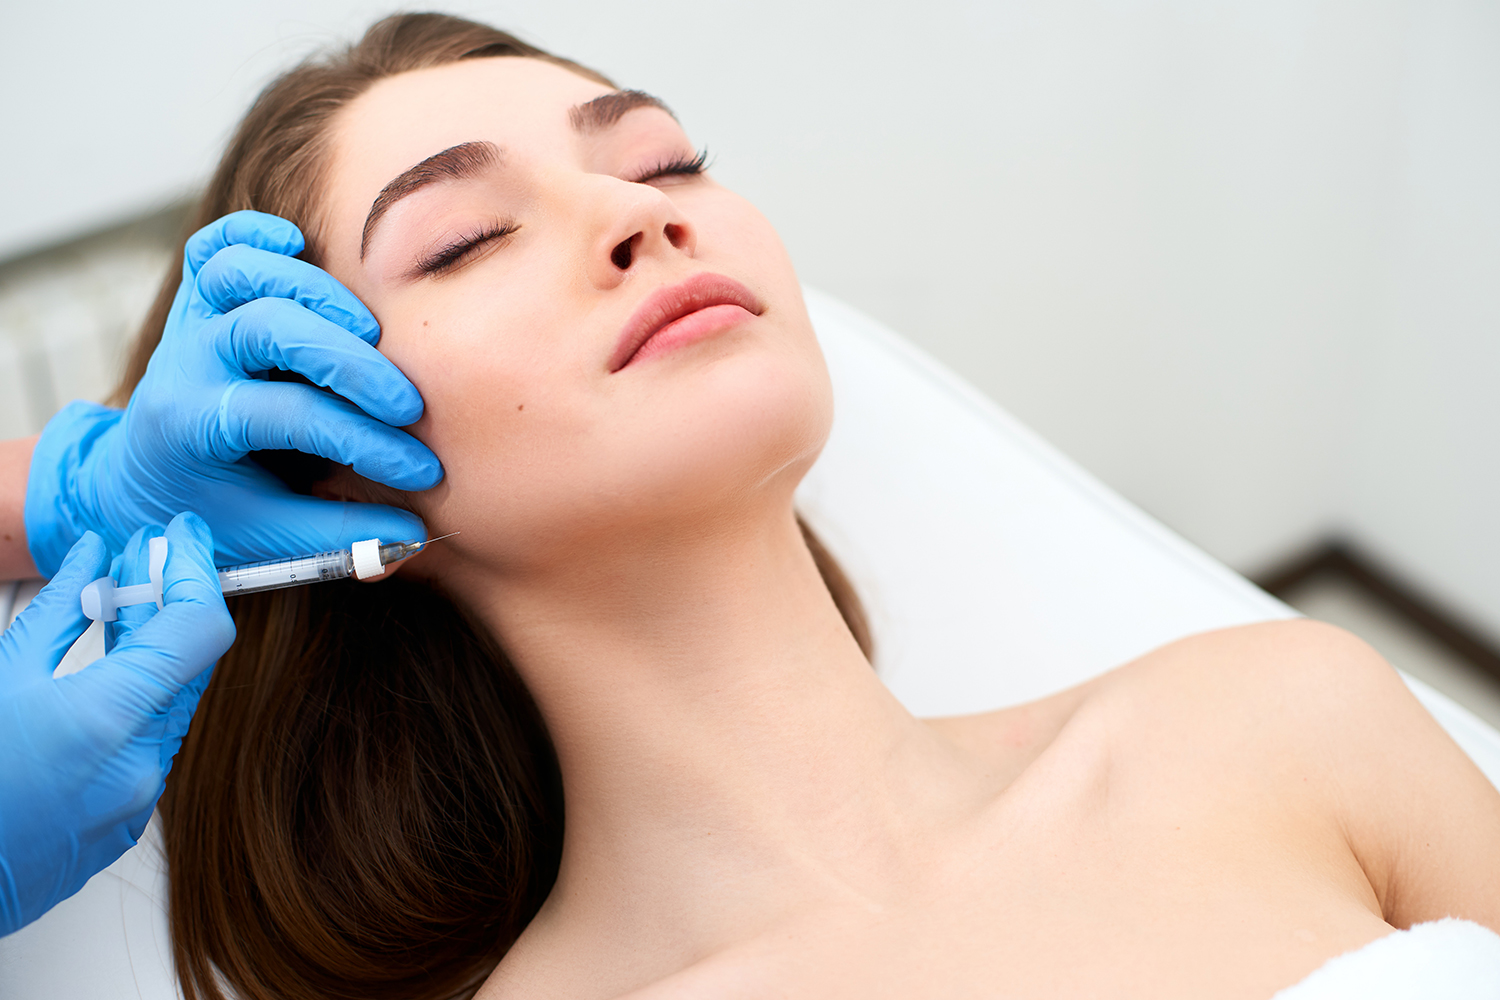 Side view of woman receiving microdermabrasion therapy on forehead at beauty spa. Hydrafacial procedure in Cosmetology clinic.